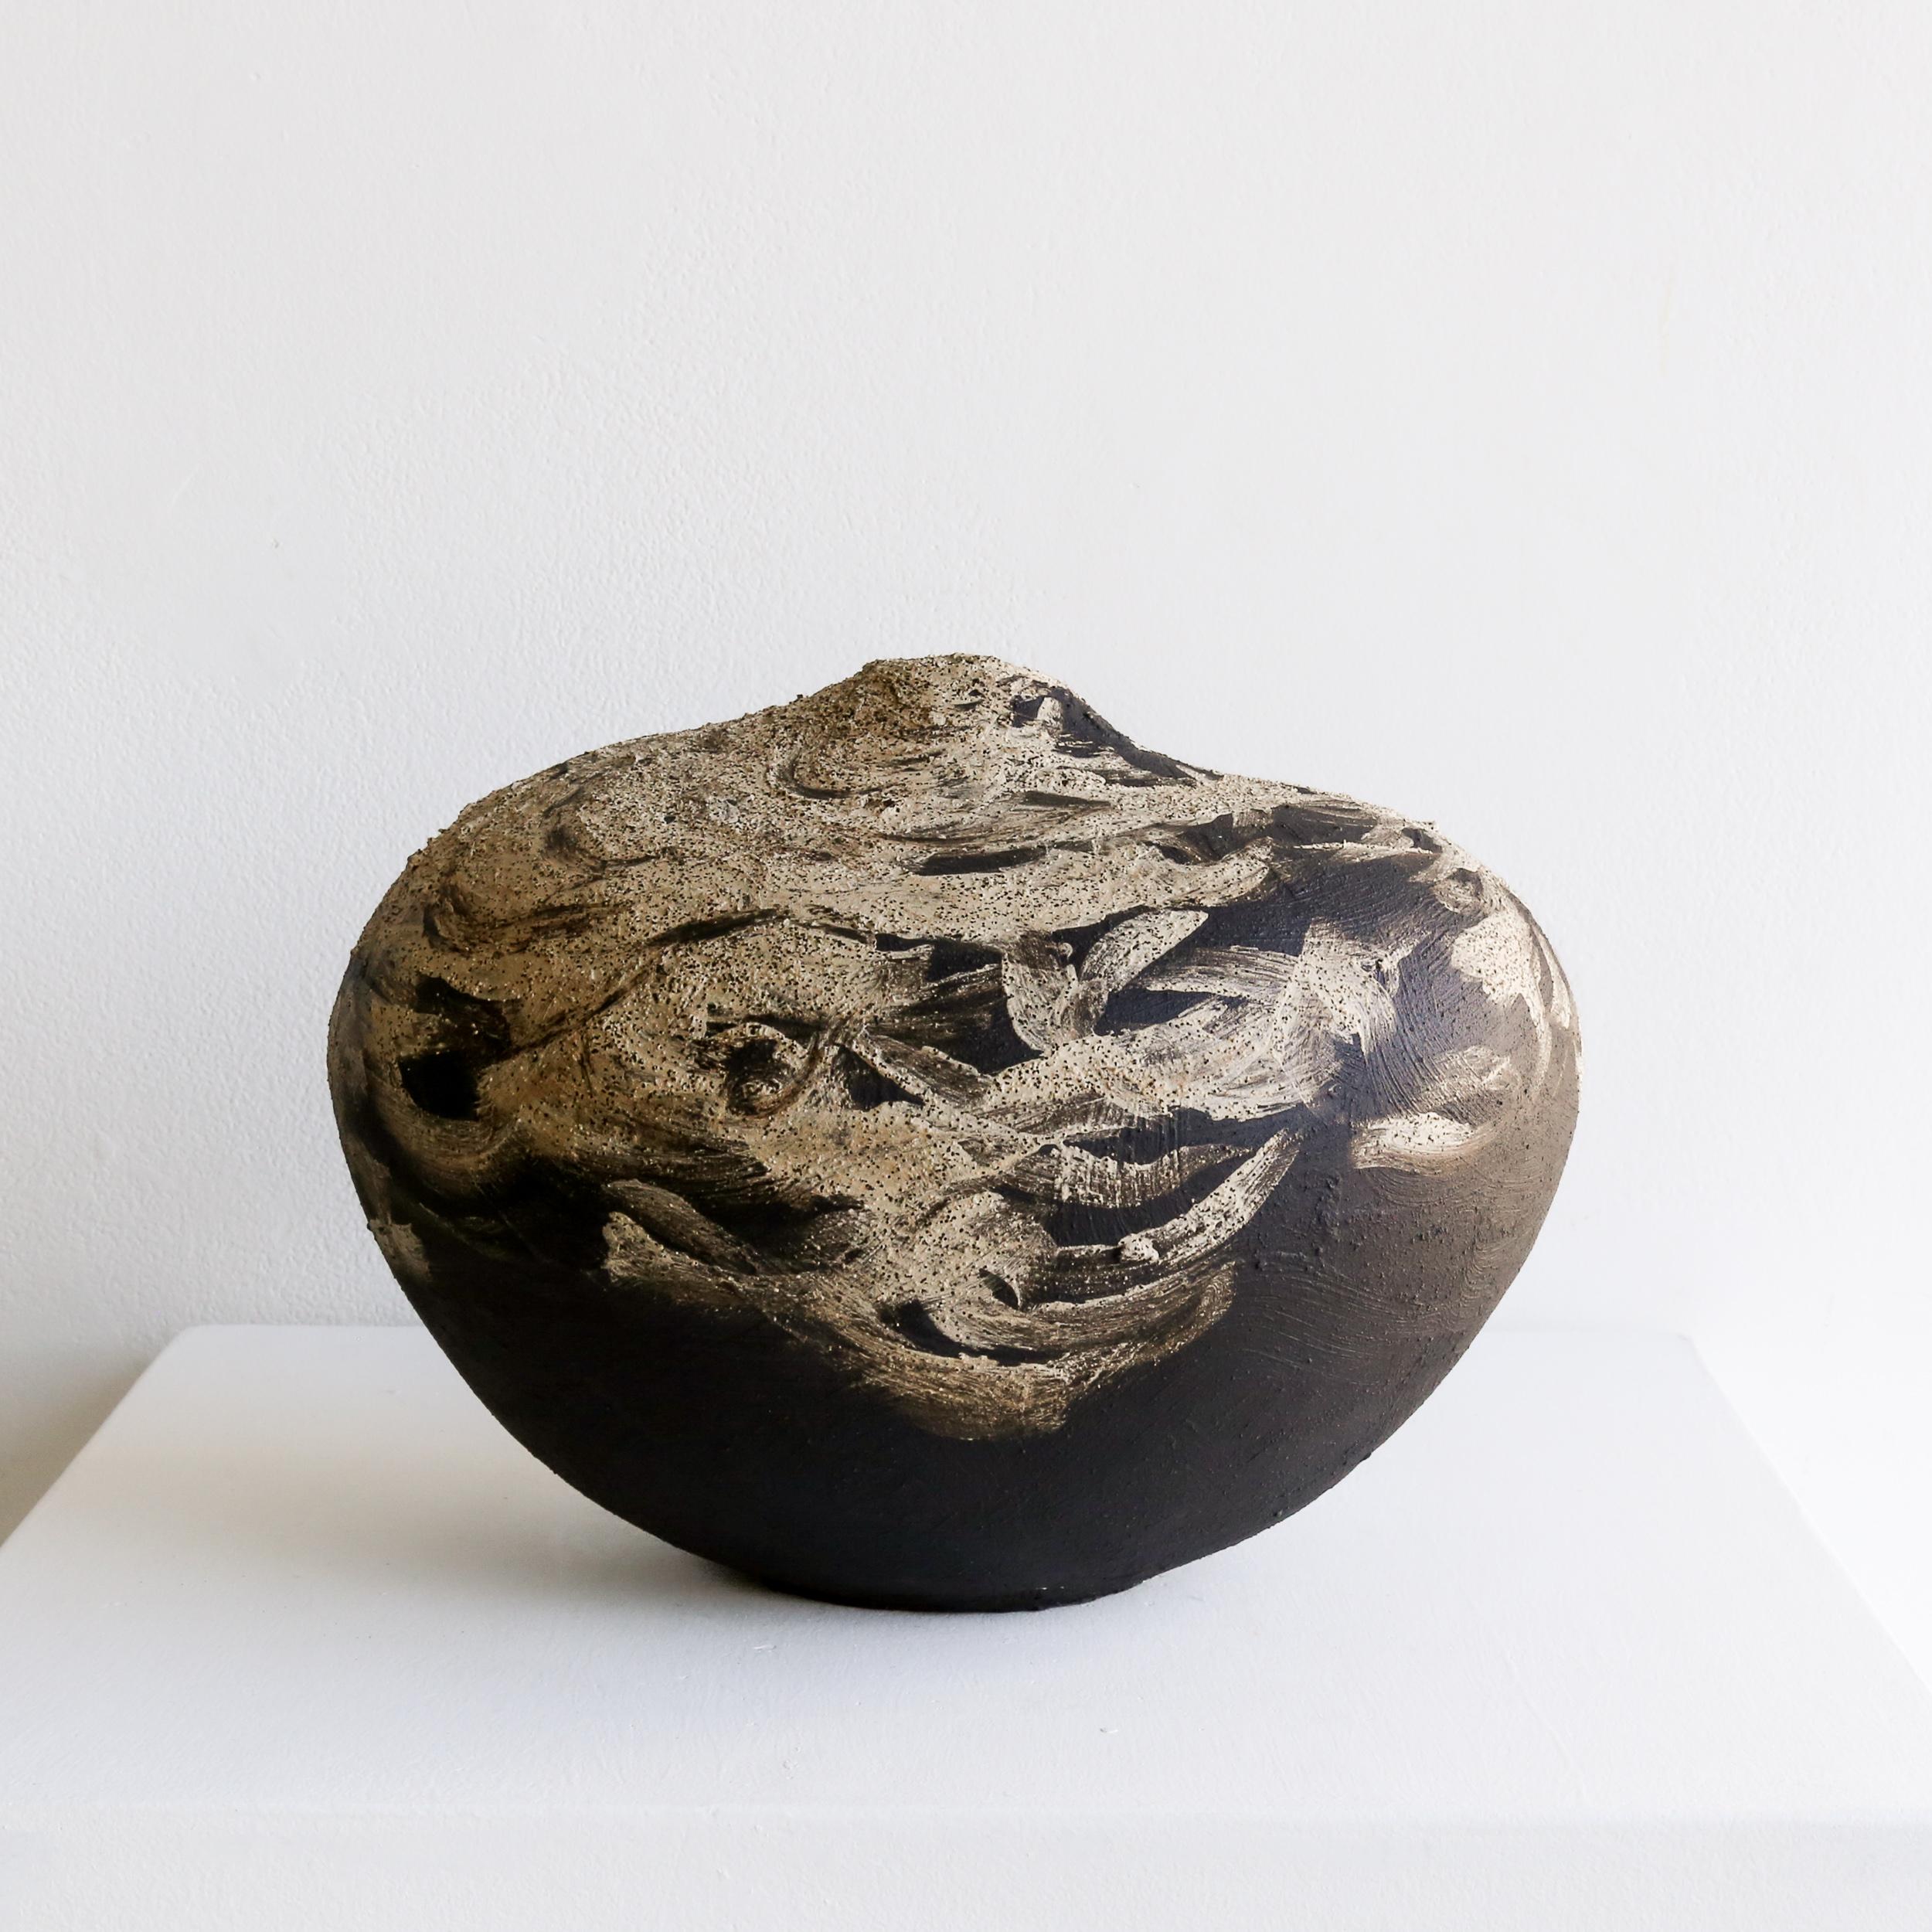 Textured Vessel No 119 - Sculpture by Beverly Morrison